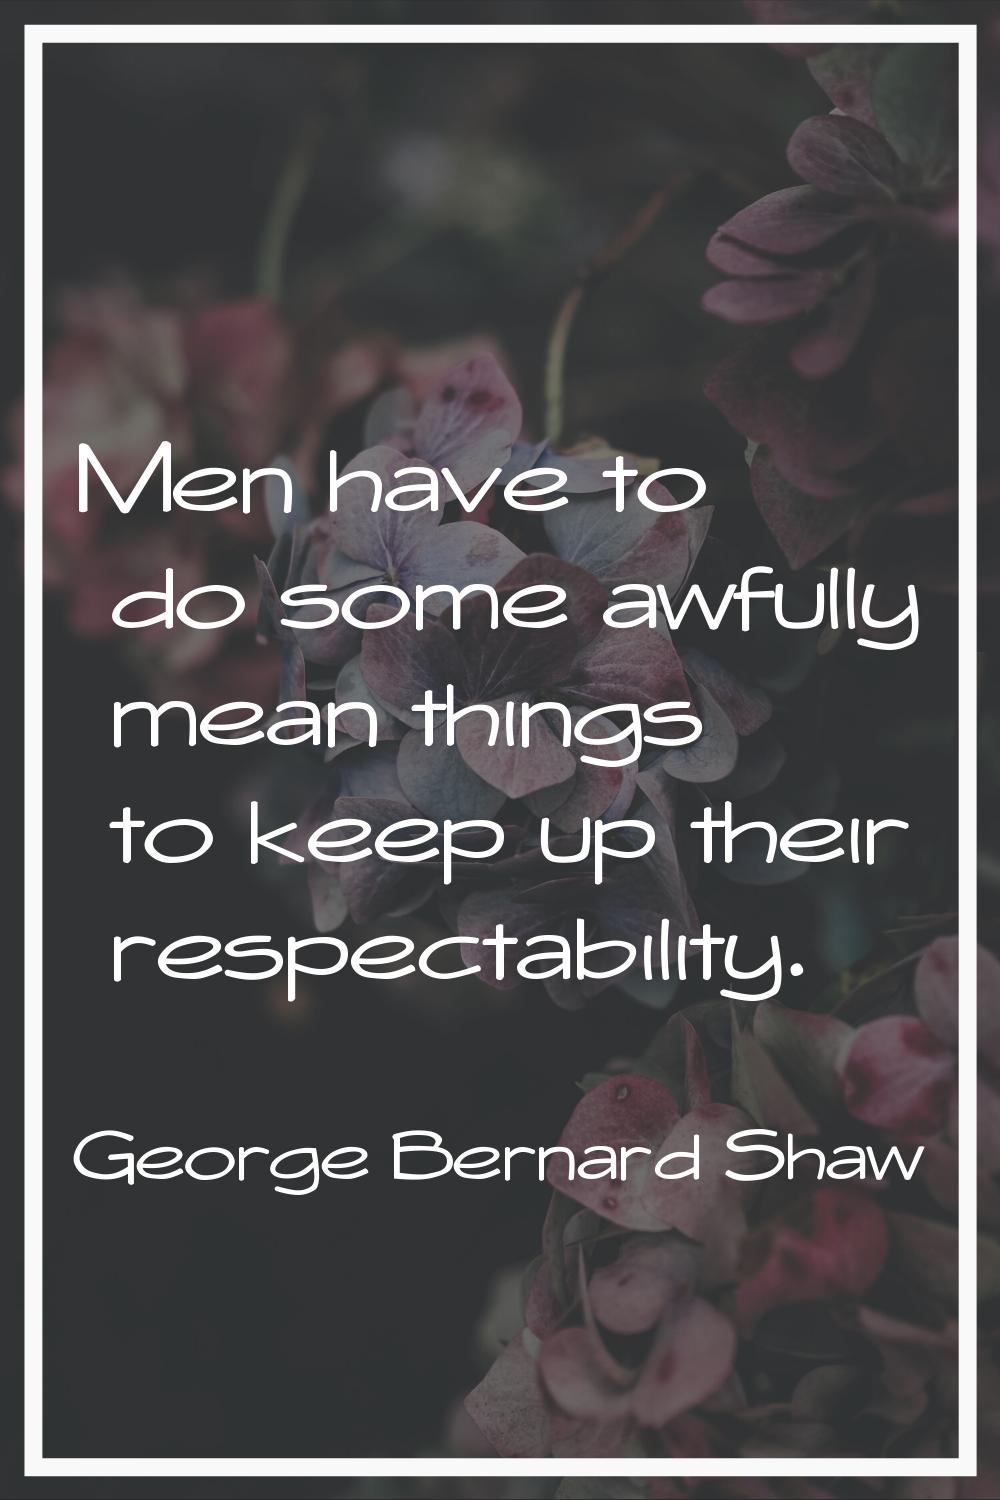 Men have to do some awfully mean things to keep up their respectability.